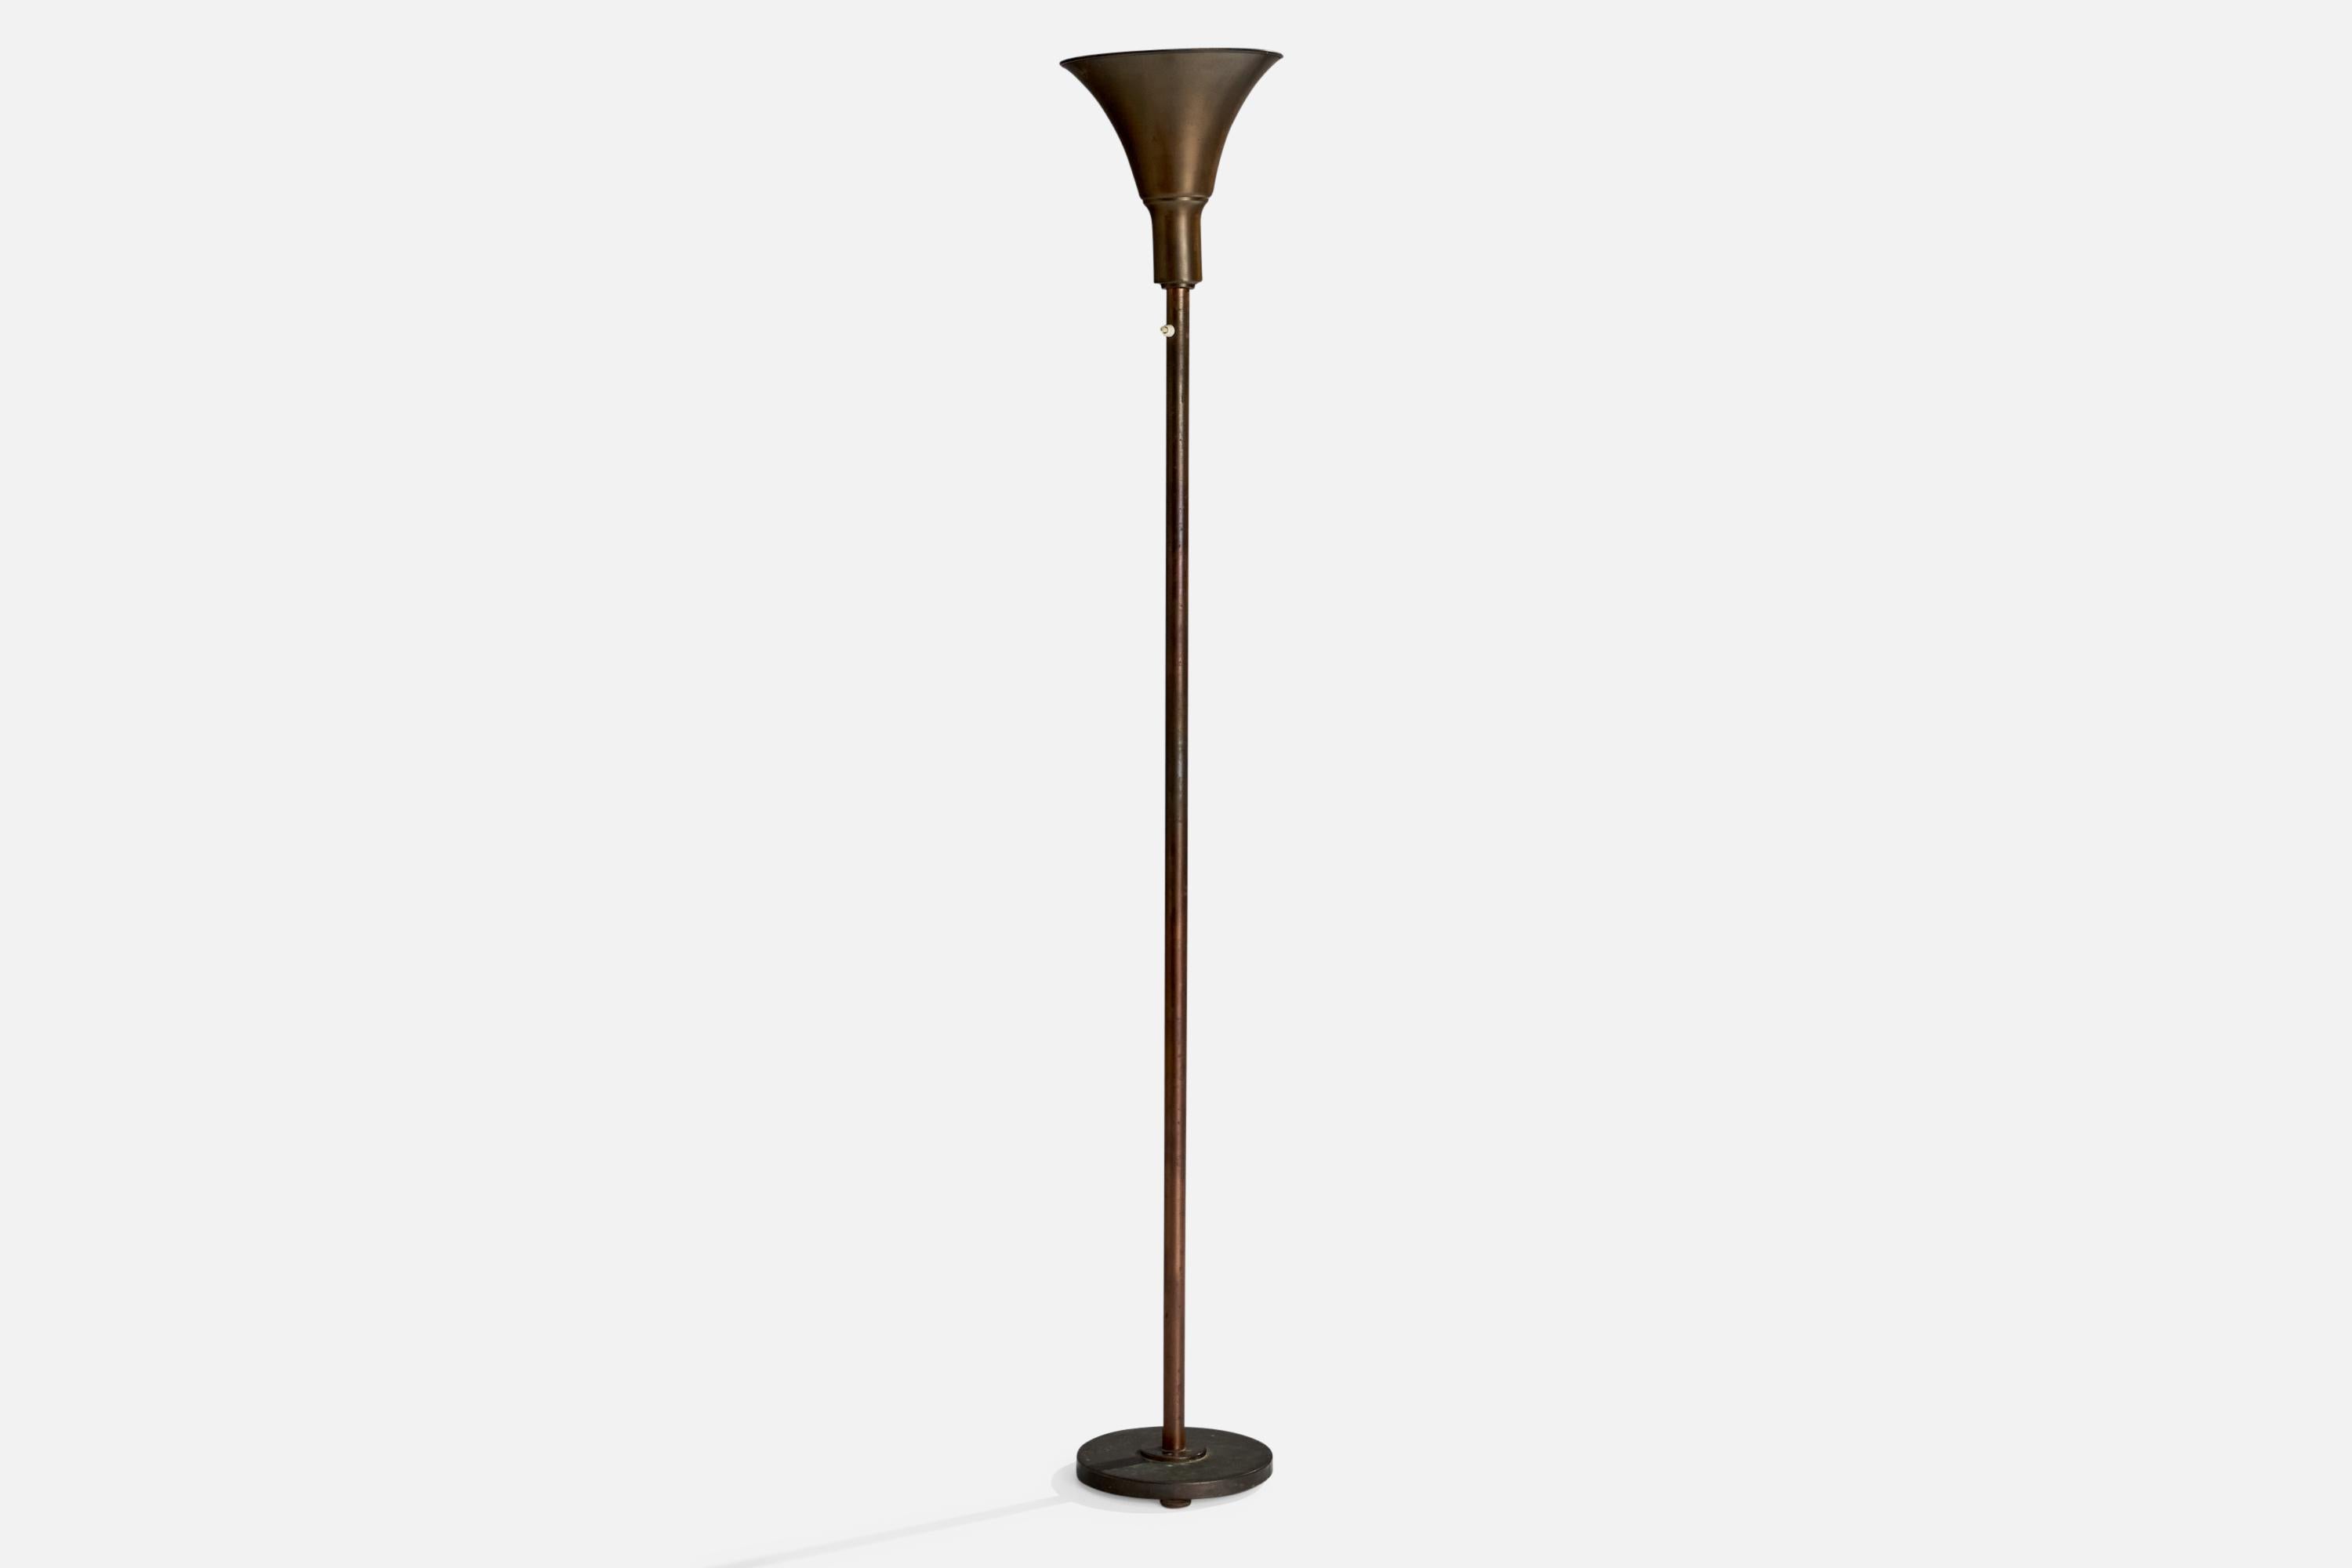 A bronze uplight floor lamp designed and produced in Sweden, c. 1930s.

Overall Dimensions (inches): 68.51” H x 10.44”  W x 10.44”  D
Stated dimensions include shade.
Bulb Specifications: E-26 Bulb
Number of Sockets: 1
All lighting will be converted